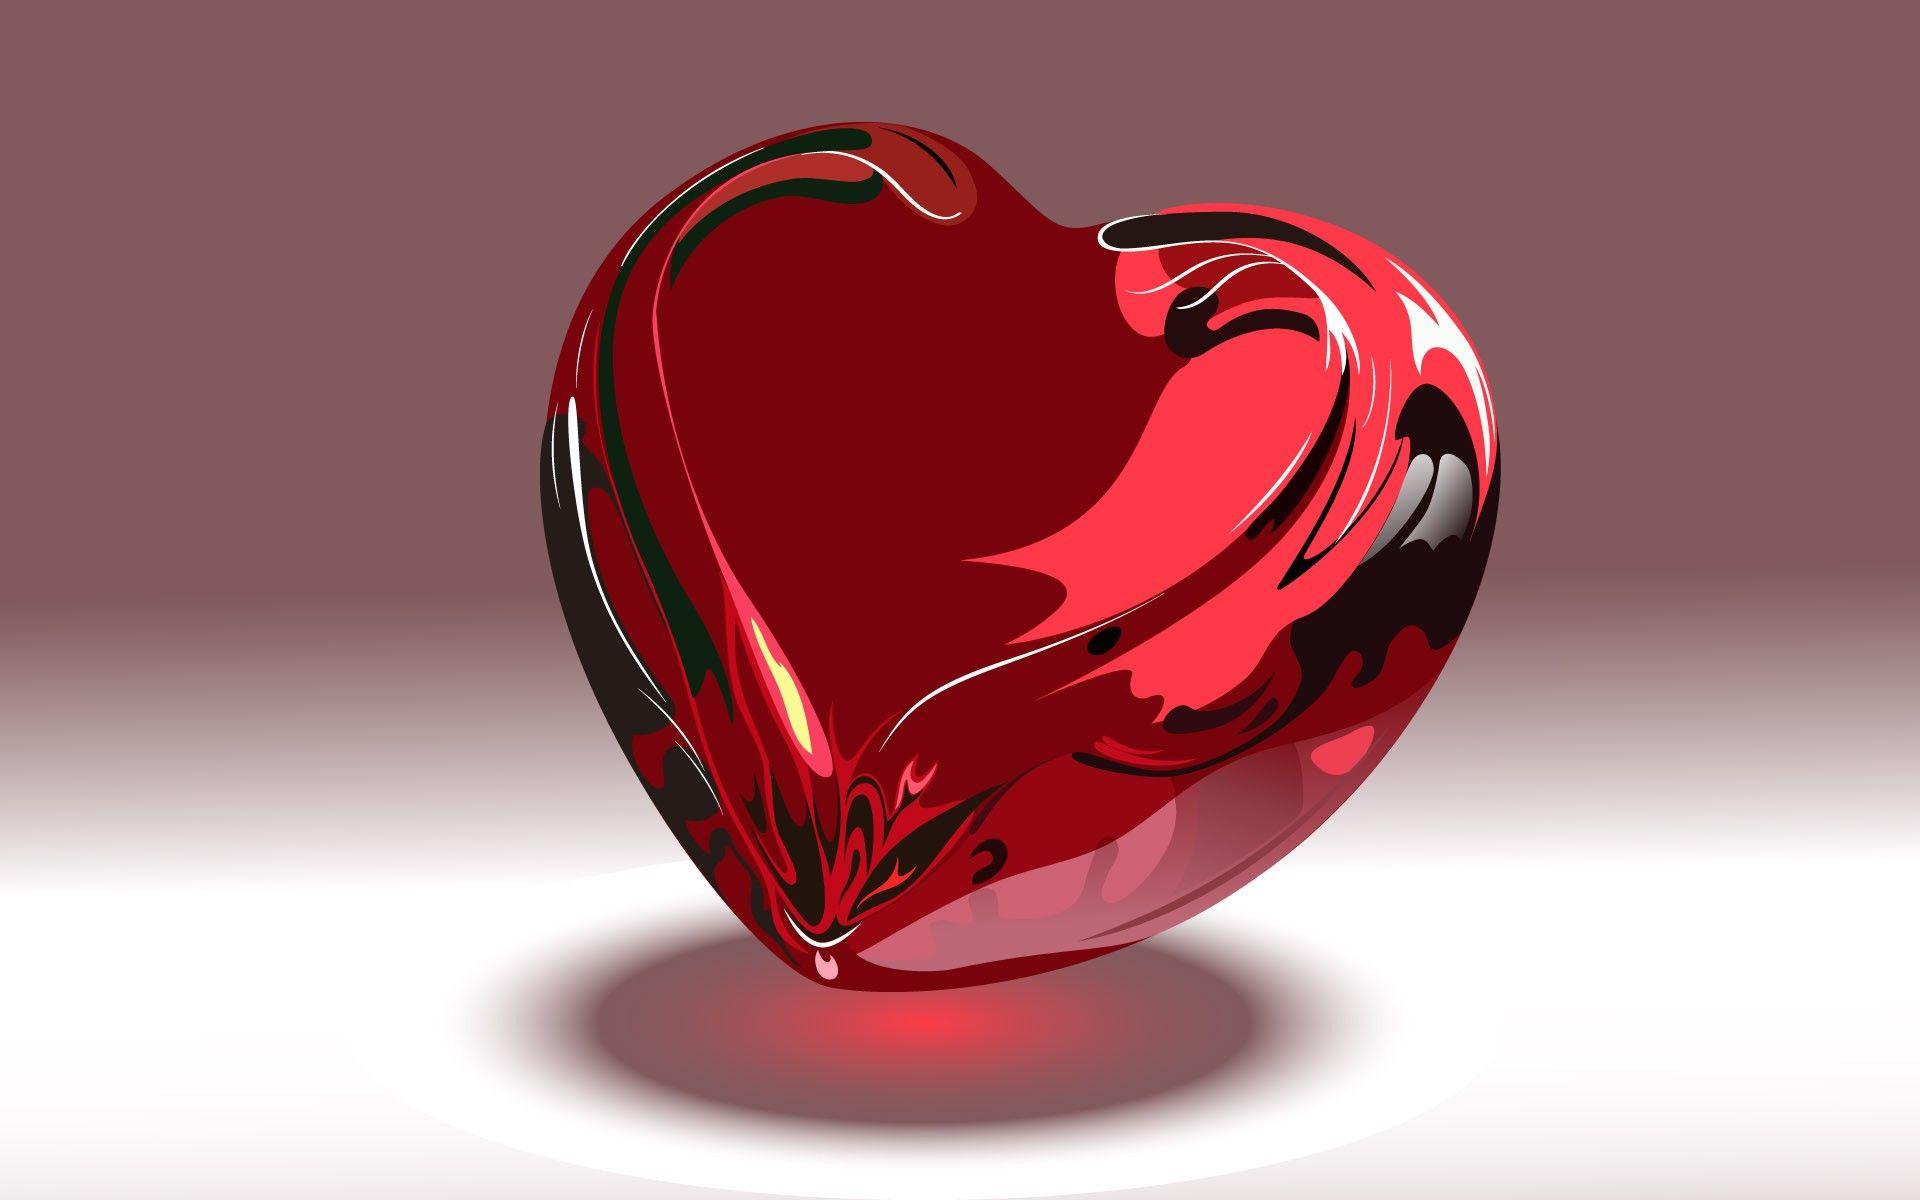 Awesome Dil Wallpaper 3D HD Image Widescreen D Love Hearts New Of